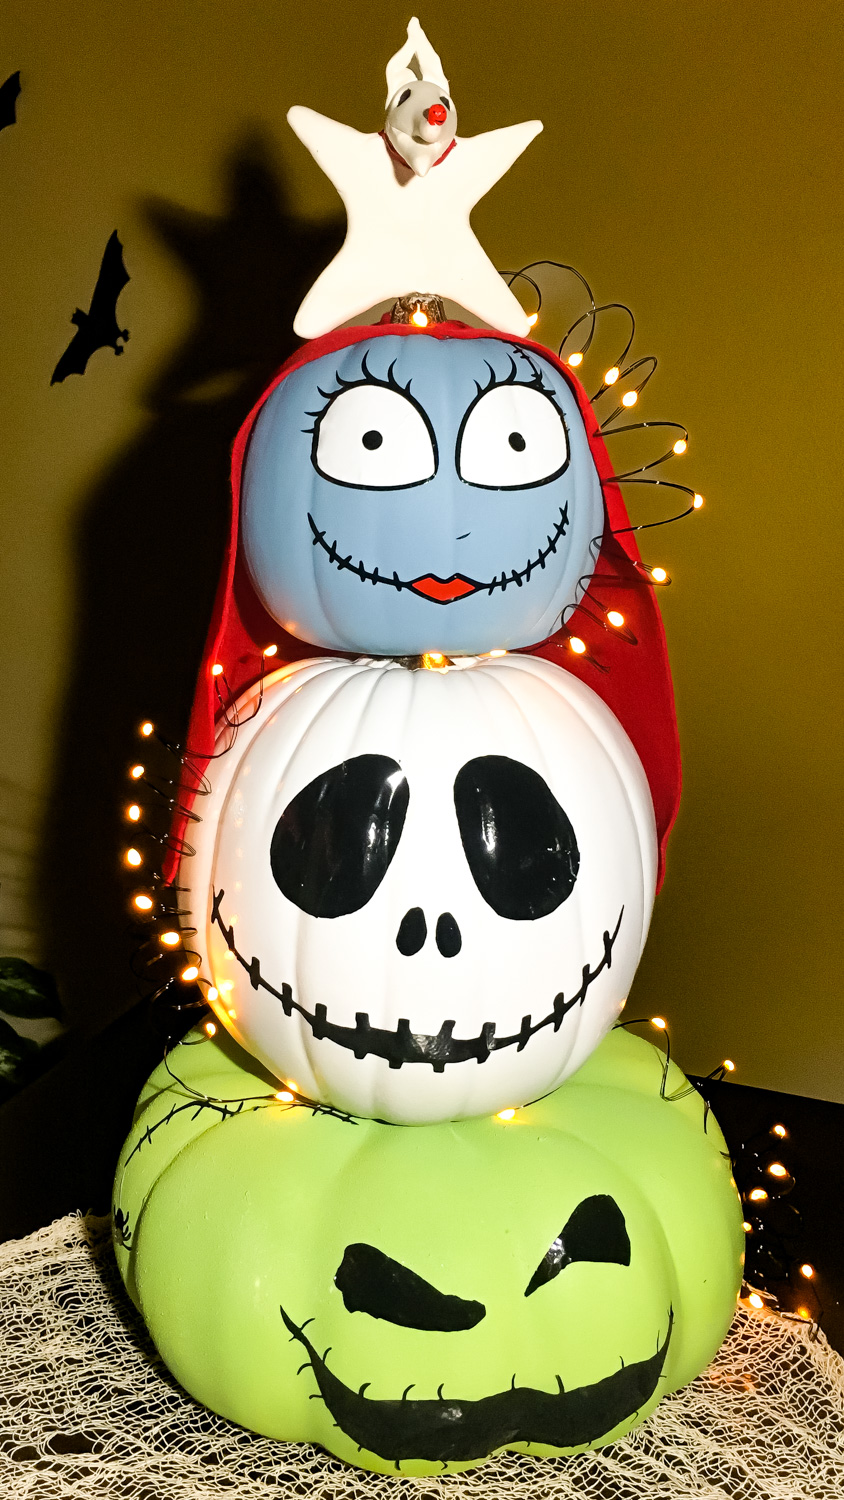 stacked jack skellington pumpkin with Sally and oogie boogie